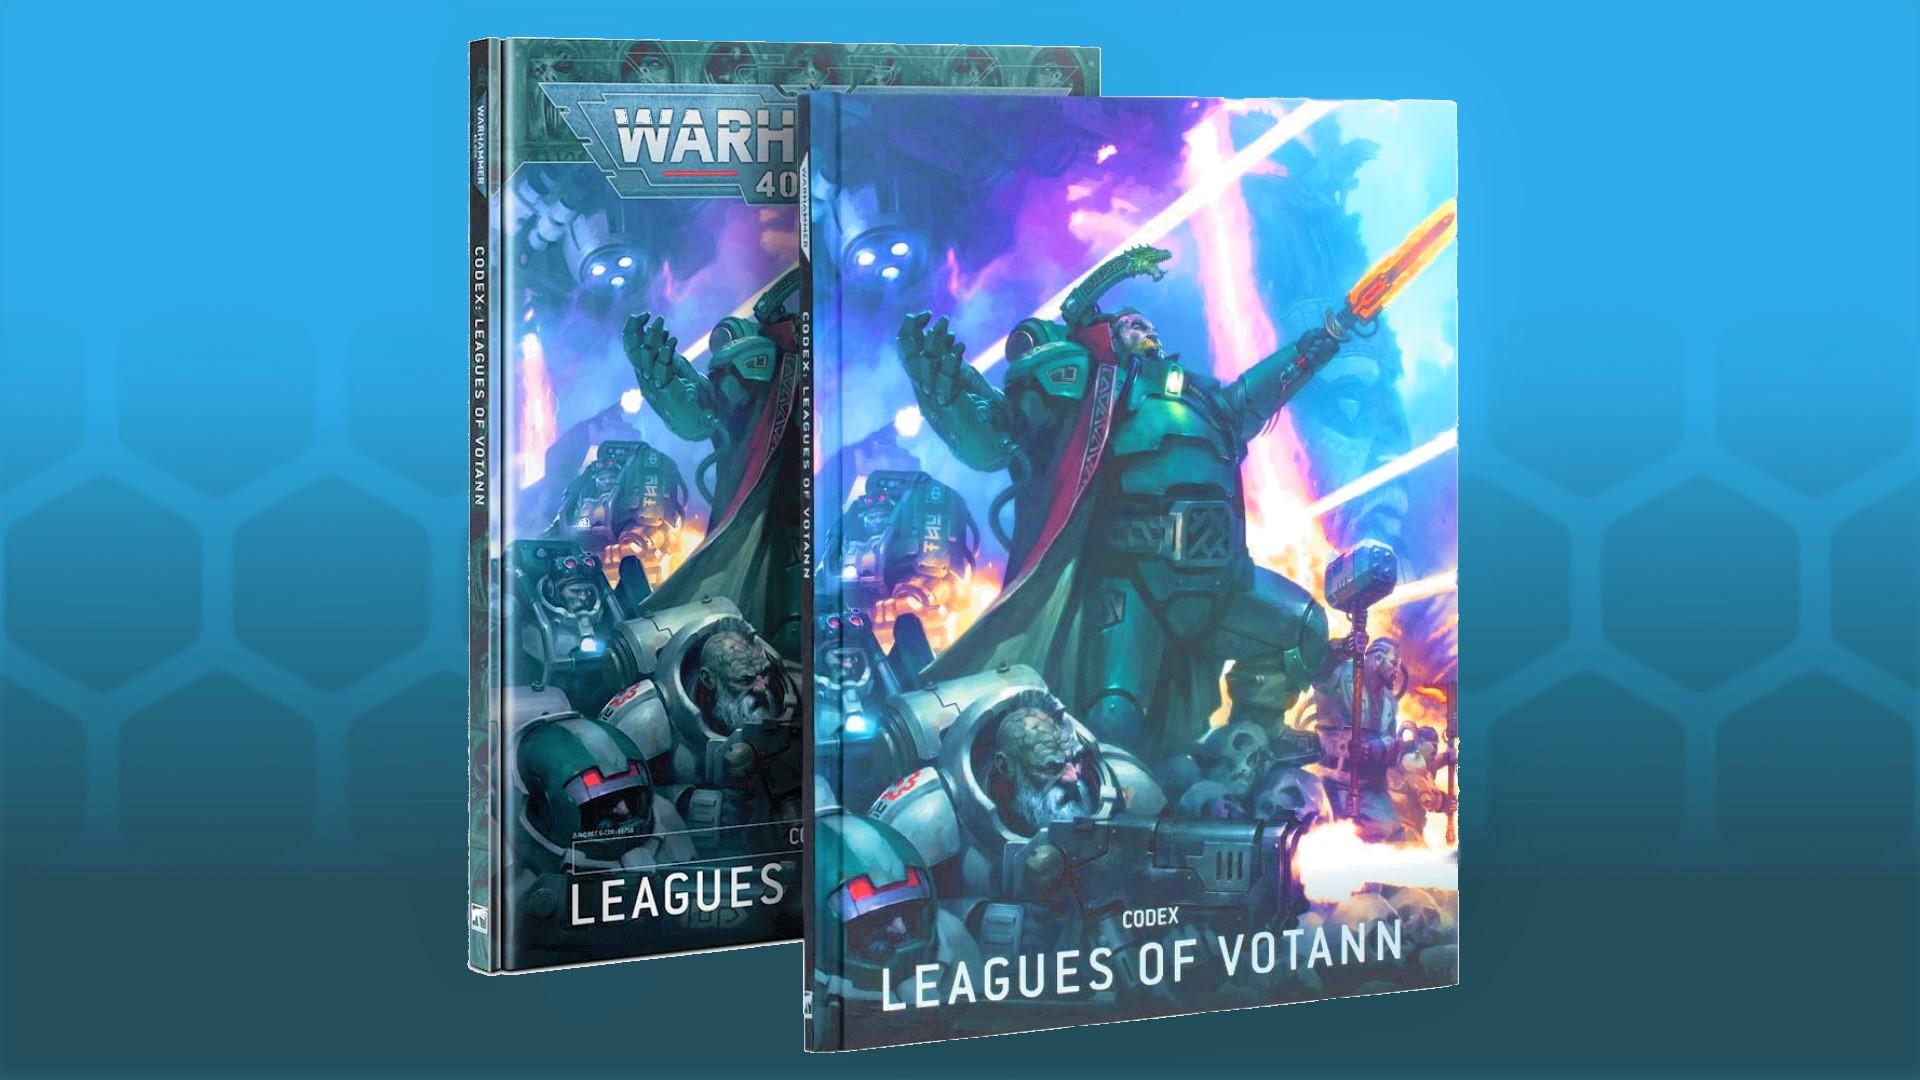 Sunday Preview – The Leagues of Votann Are on Their Way